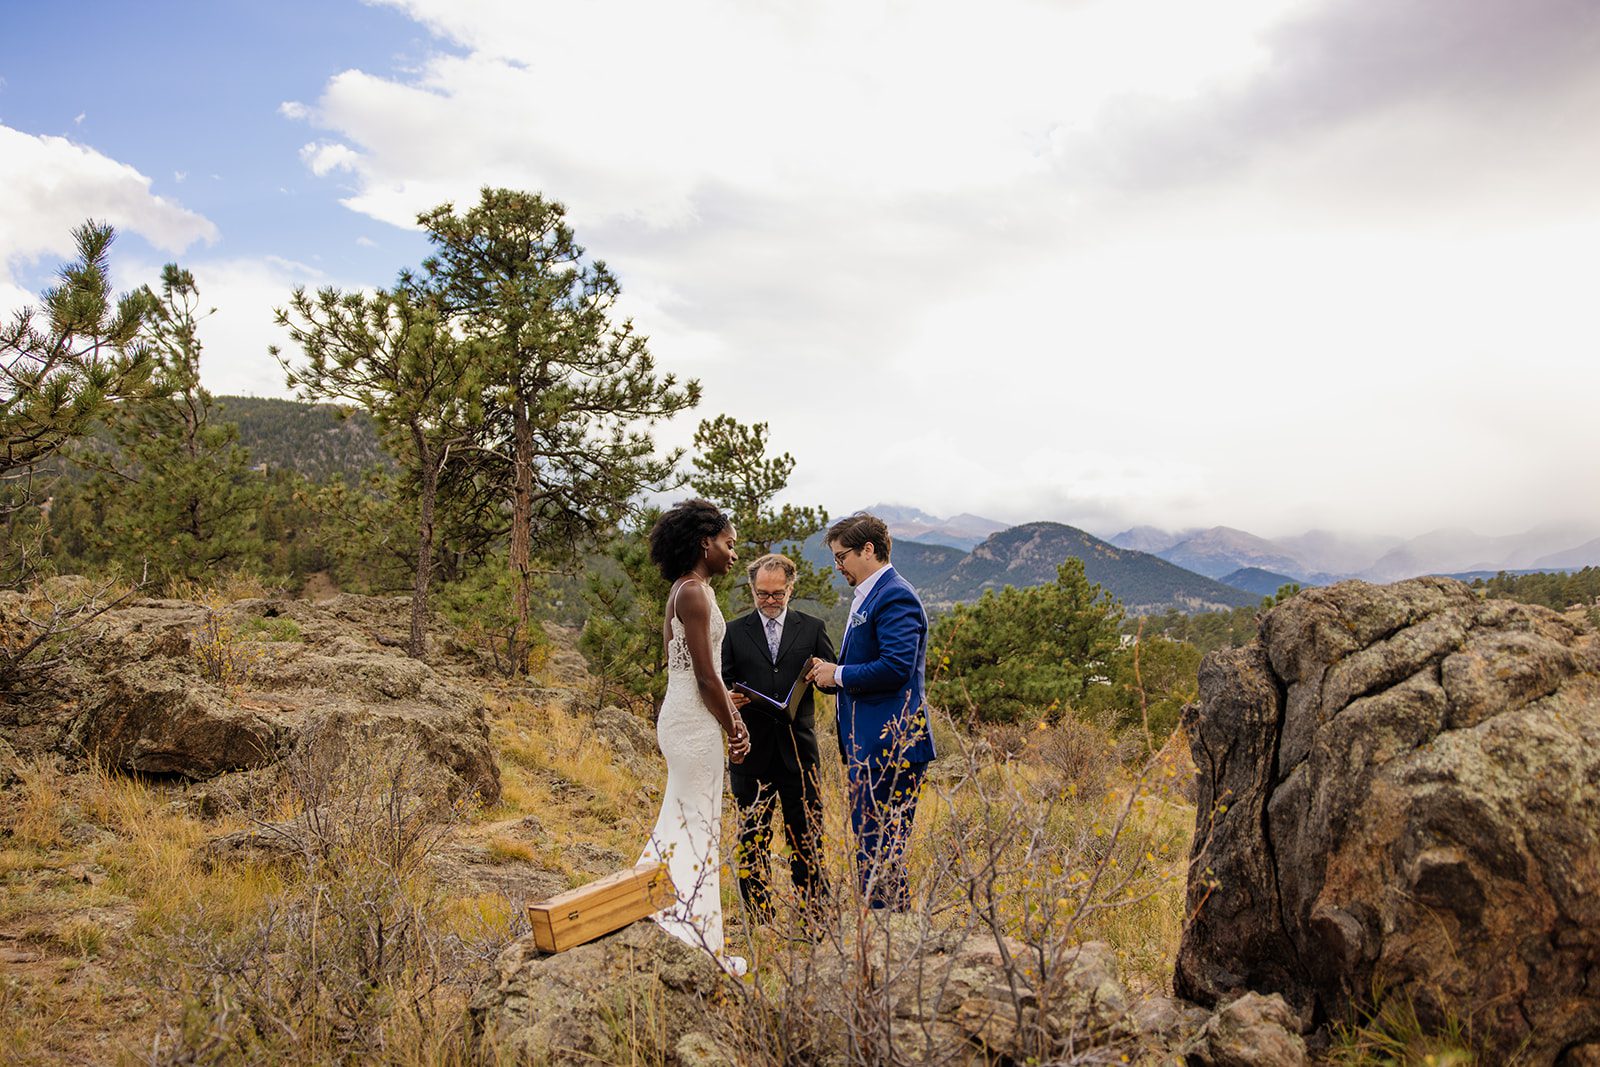 Knoll Willows Elopement ceremony